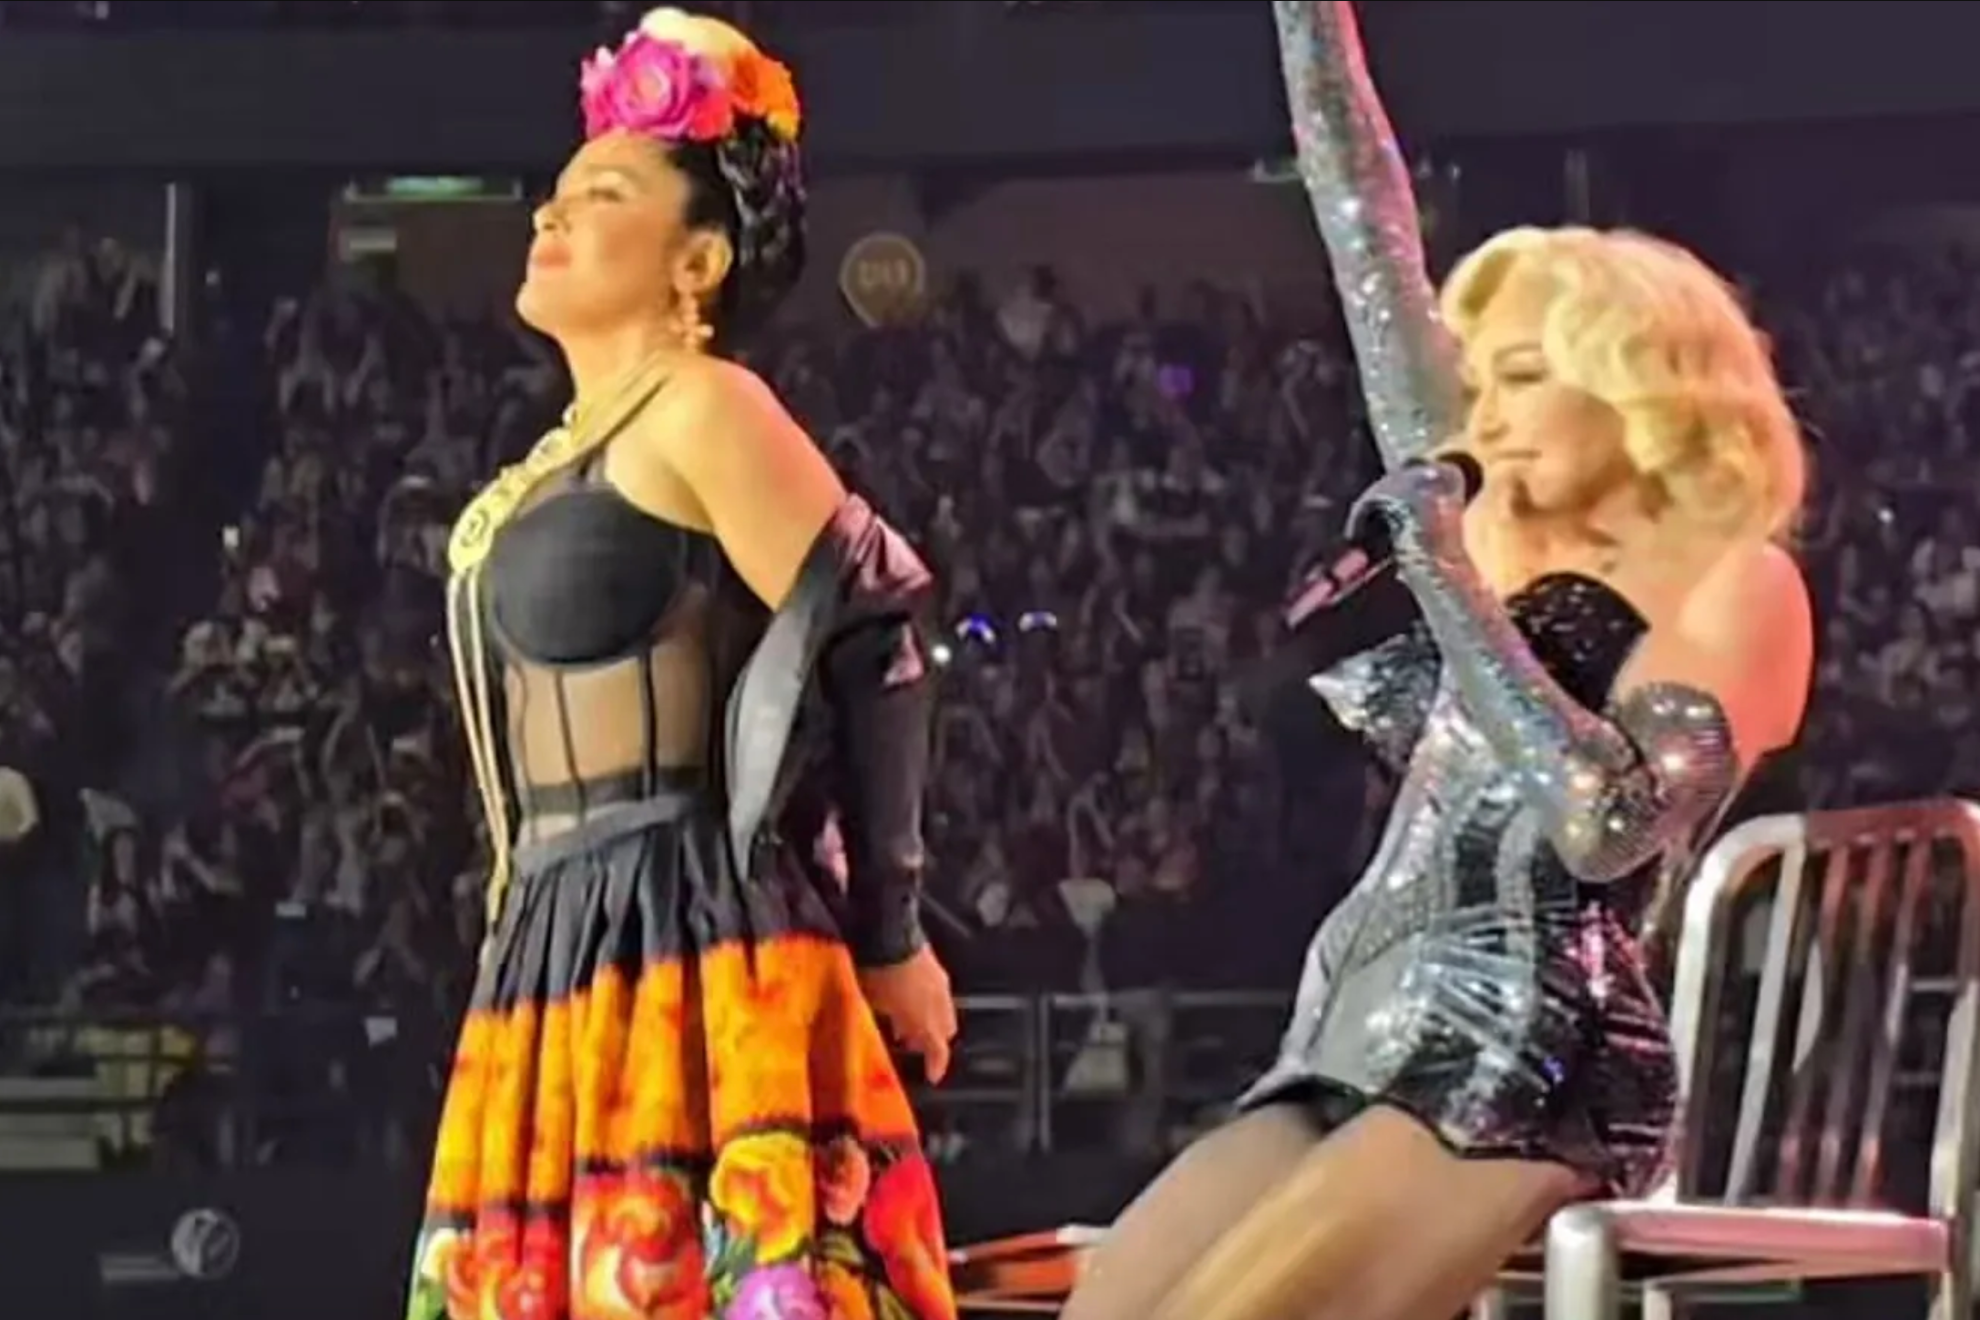 Madonna says goodbye to Mexico in style with Salma Hayek